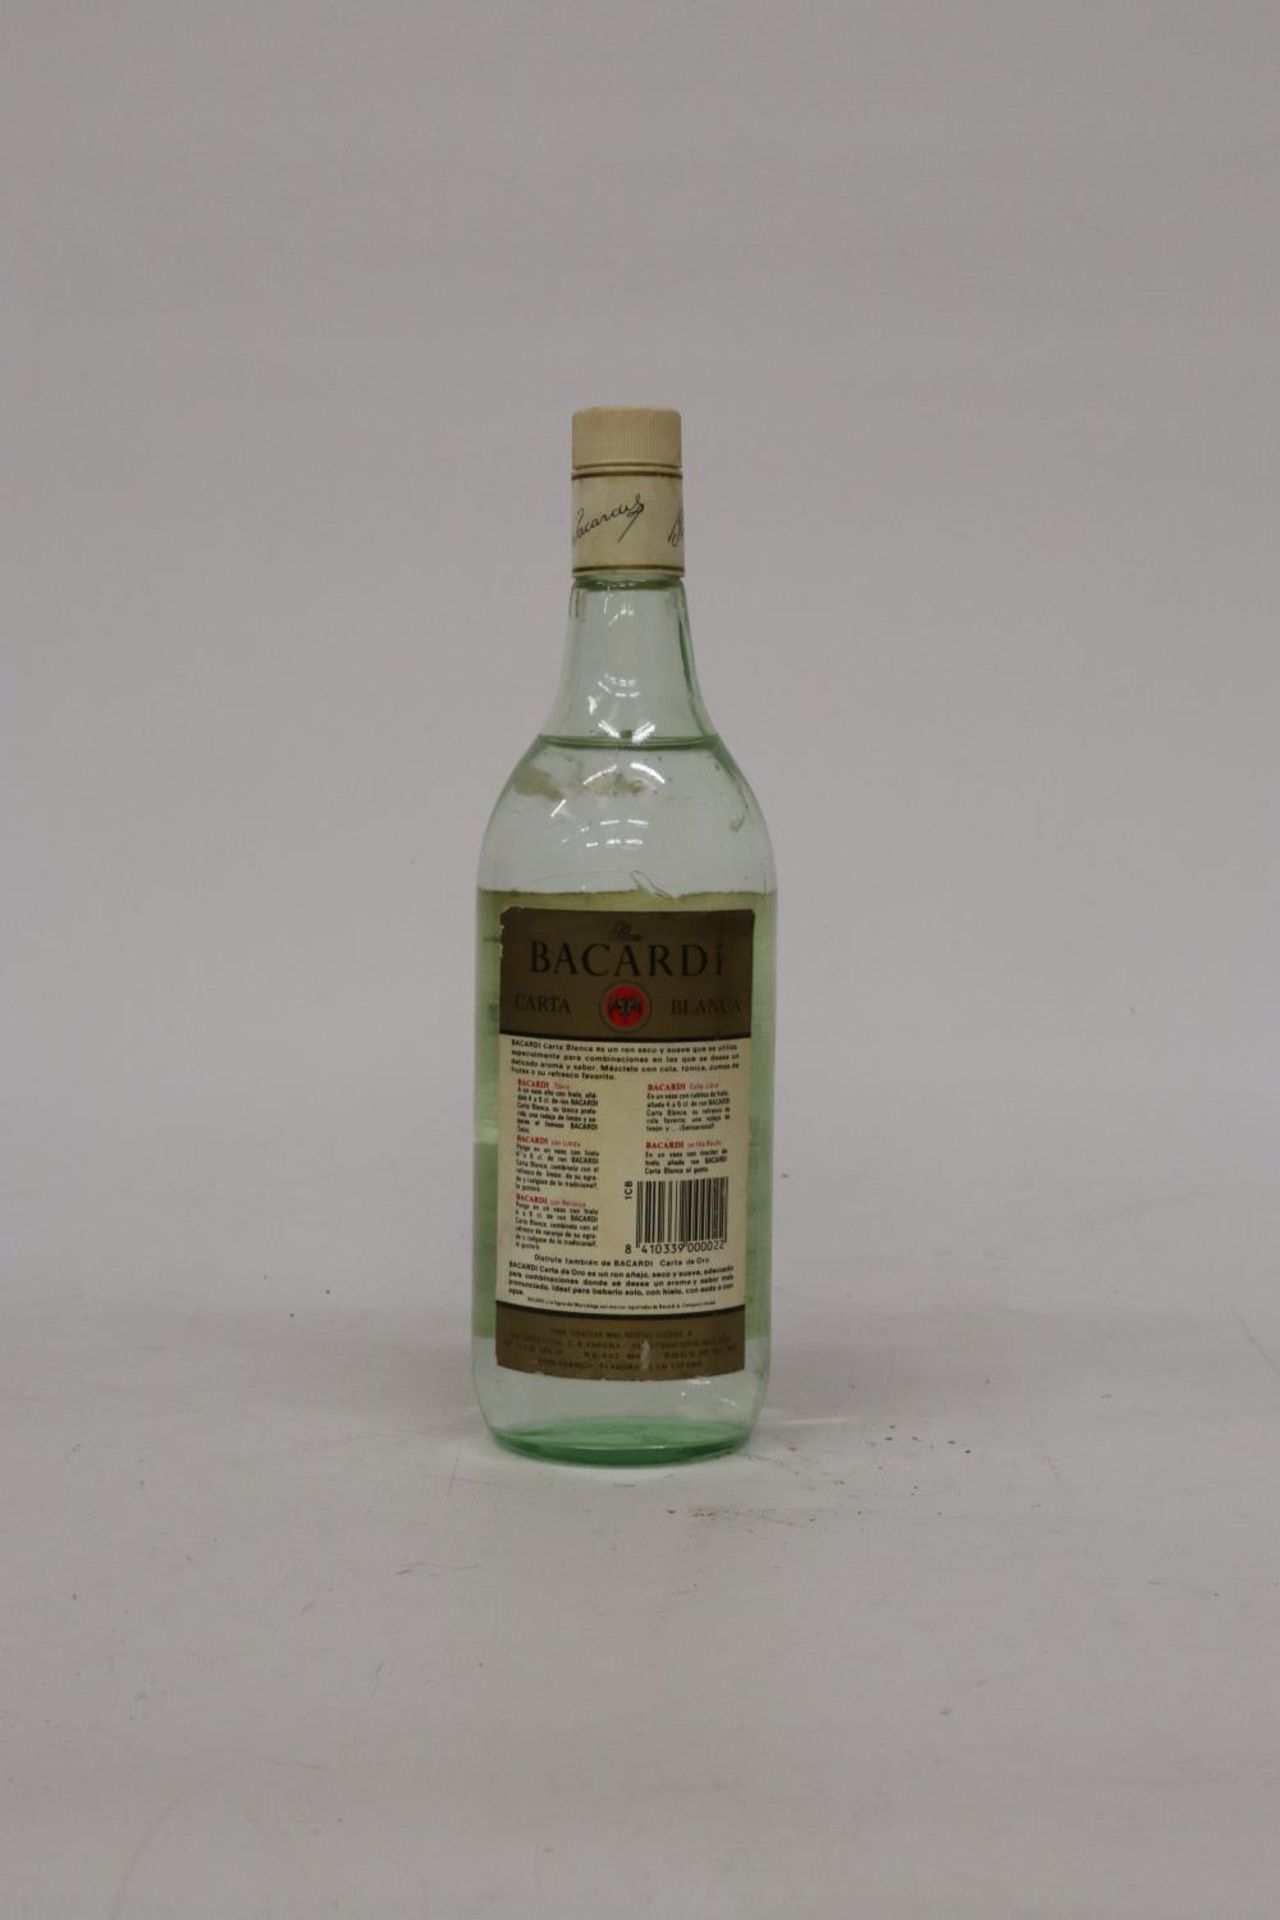 A 1L BOTTLE OF CARTA BLANCA RON SUPERIOR BACARDI - Image 2 of 4